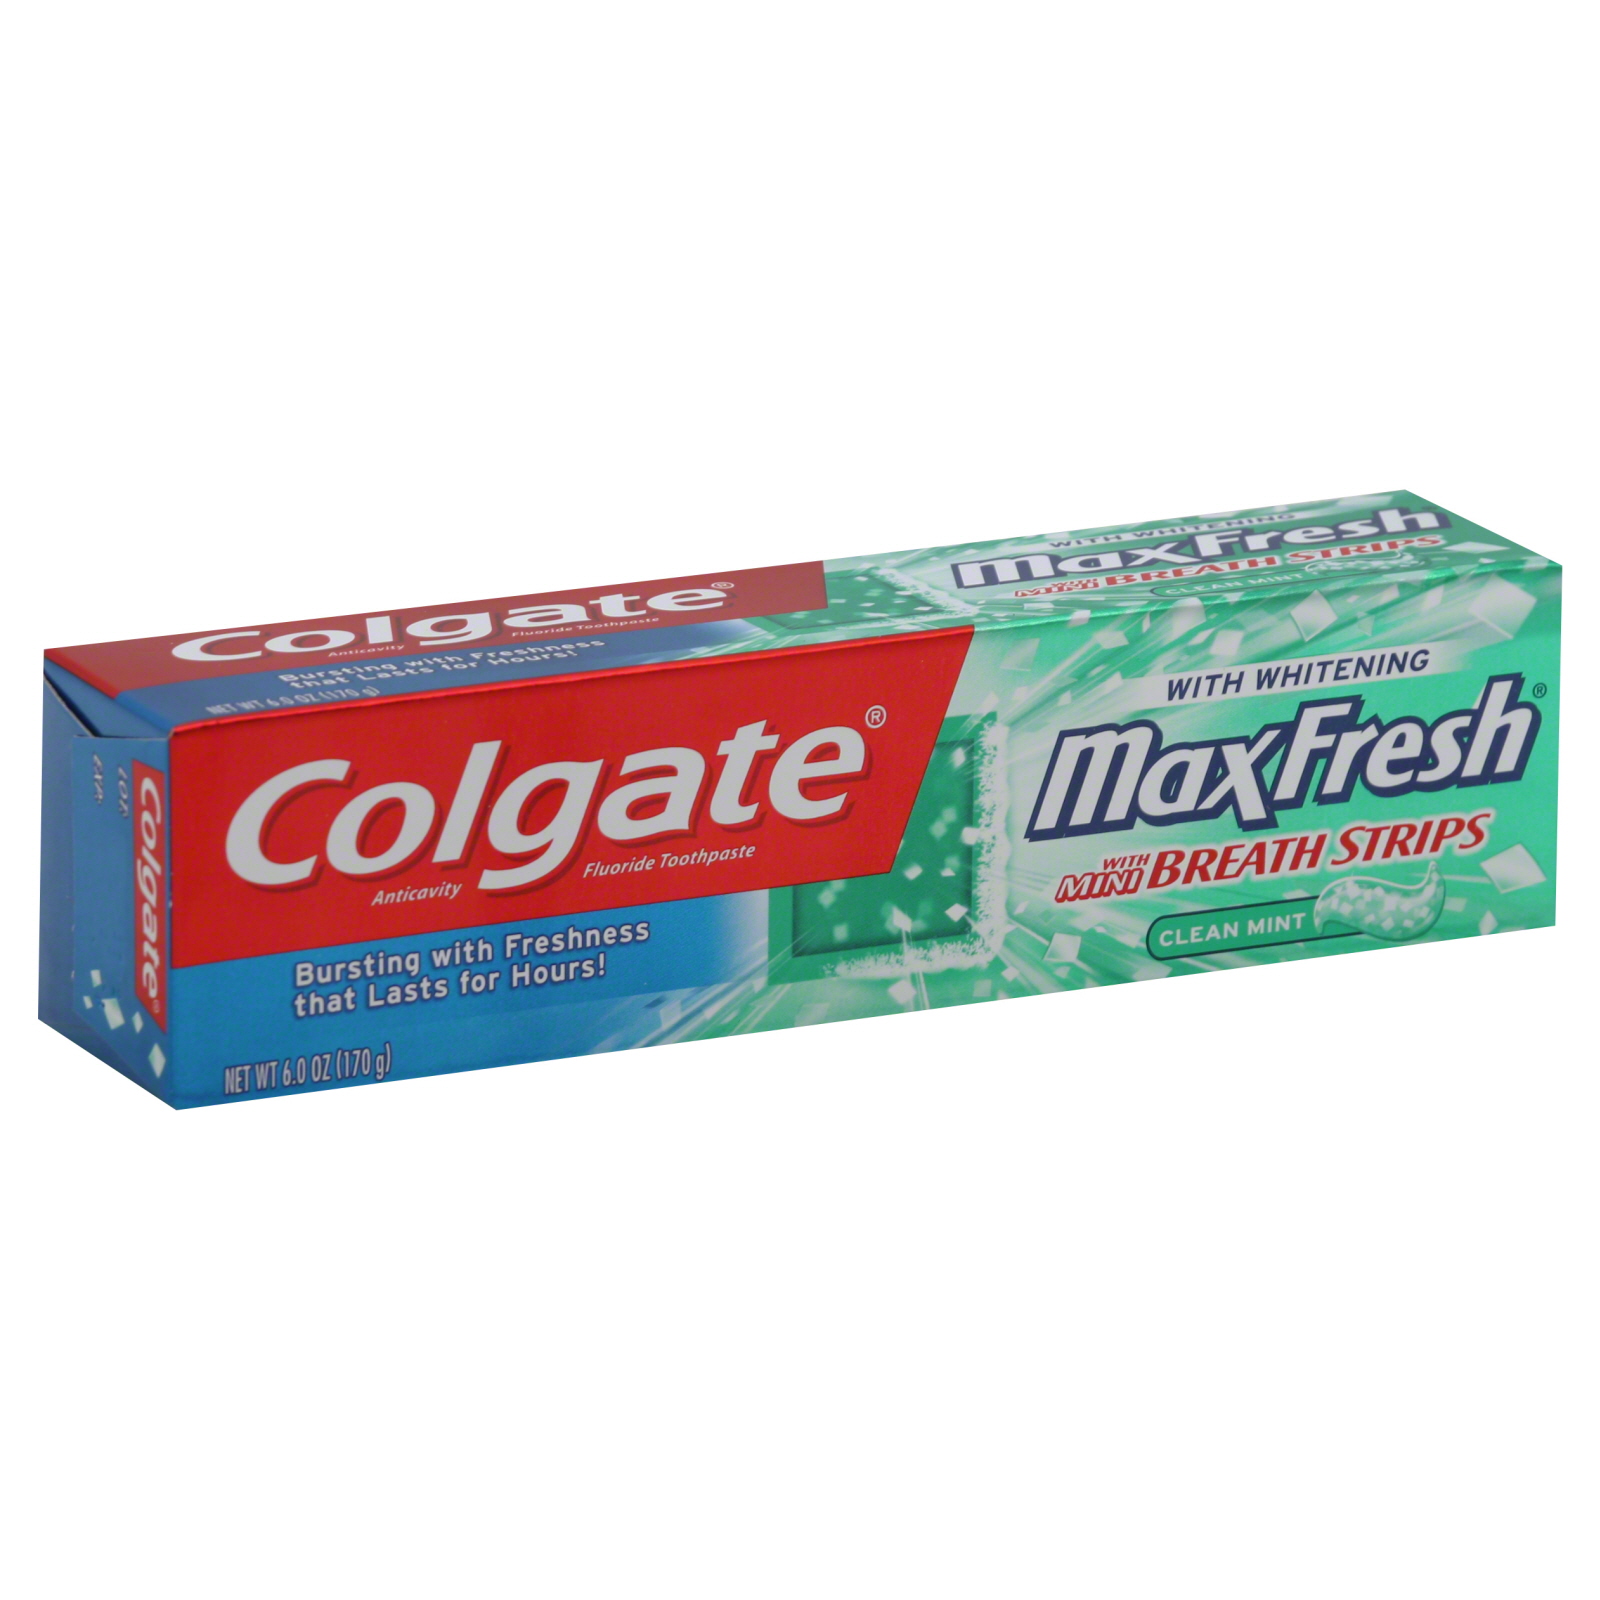 Max FreshToothpaste, Anticavity Fluoride, With Whitening, With Mini Breath Strips, Clean Mint, 6 oz (170 g)